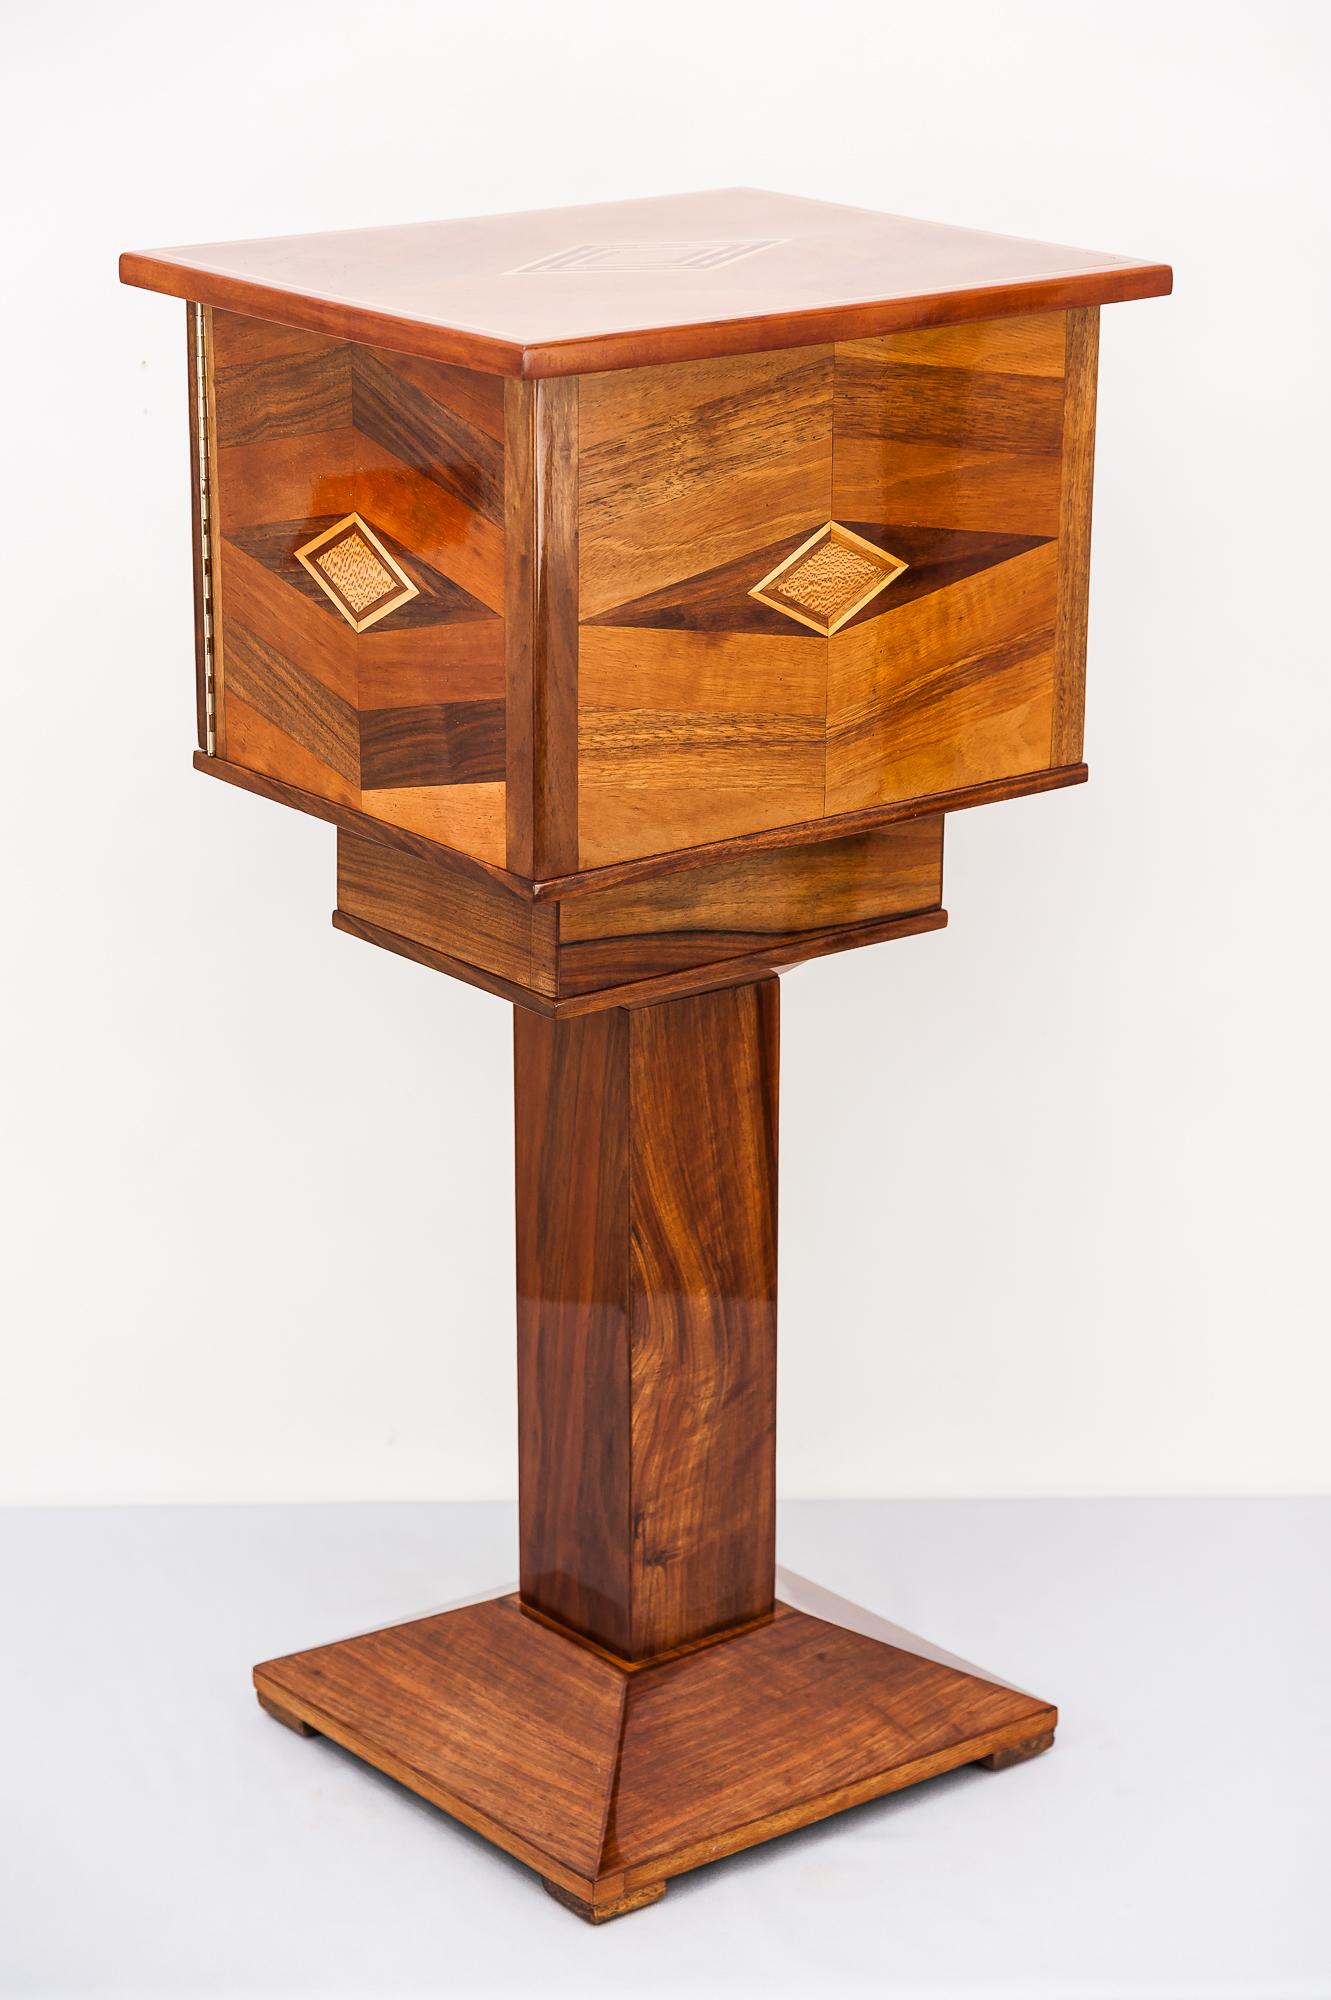 Nutwood Art Deco Table with 4 Drawers Execution in Polished Nut Wood with Inlay, 1920s